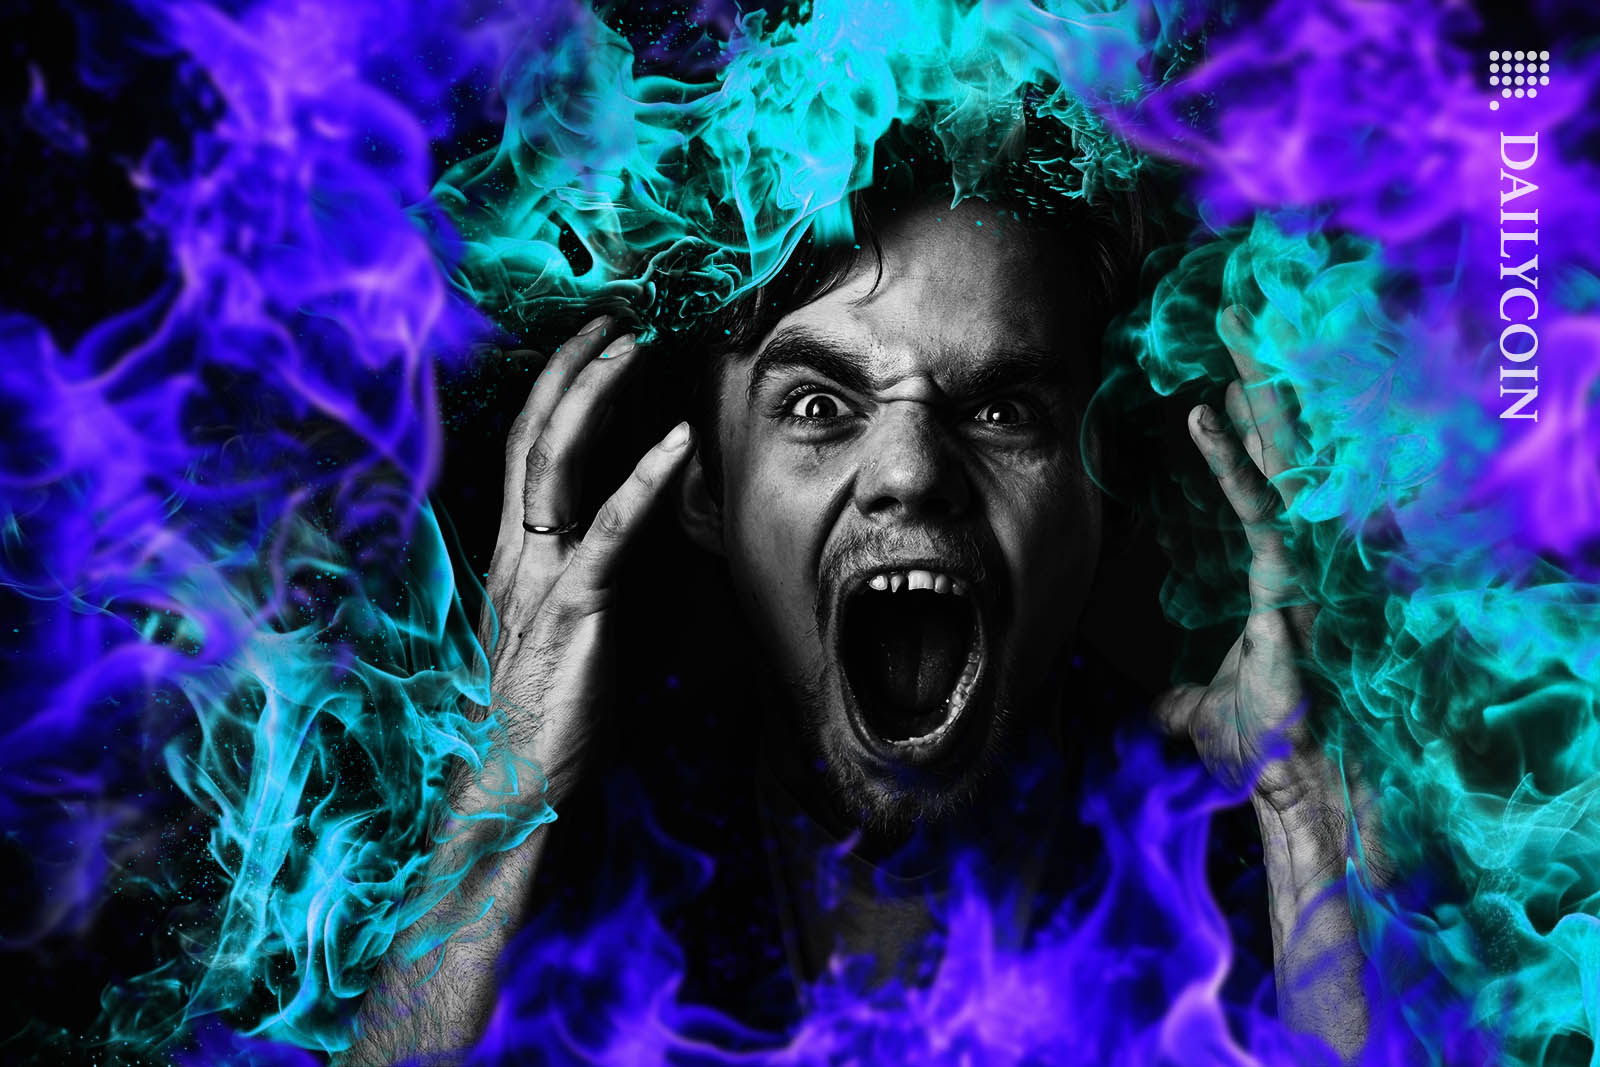 A man exploding with anger, surrounded by blue flames.